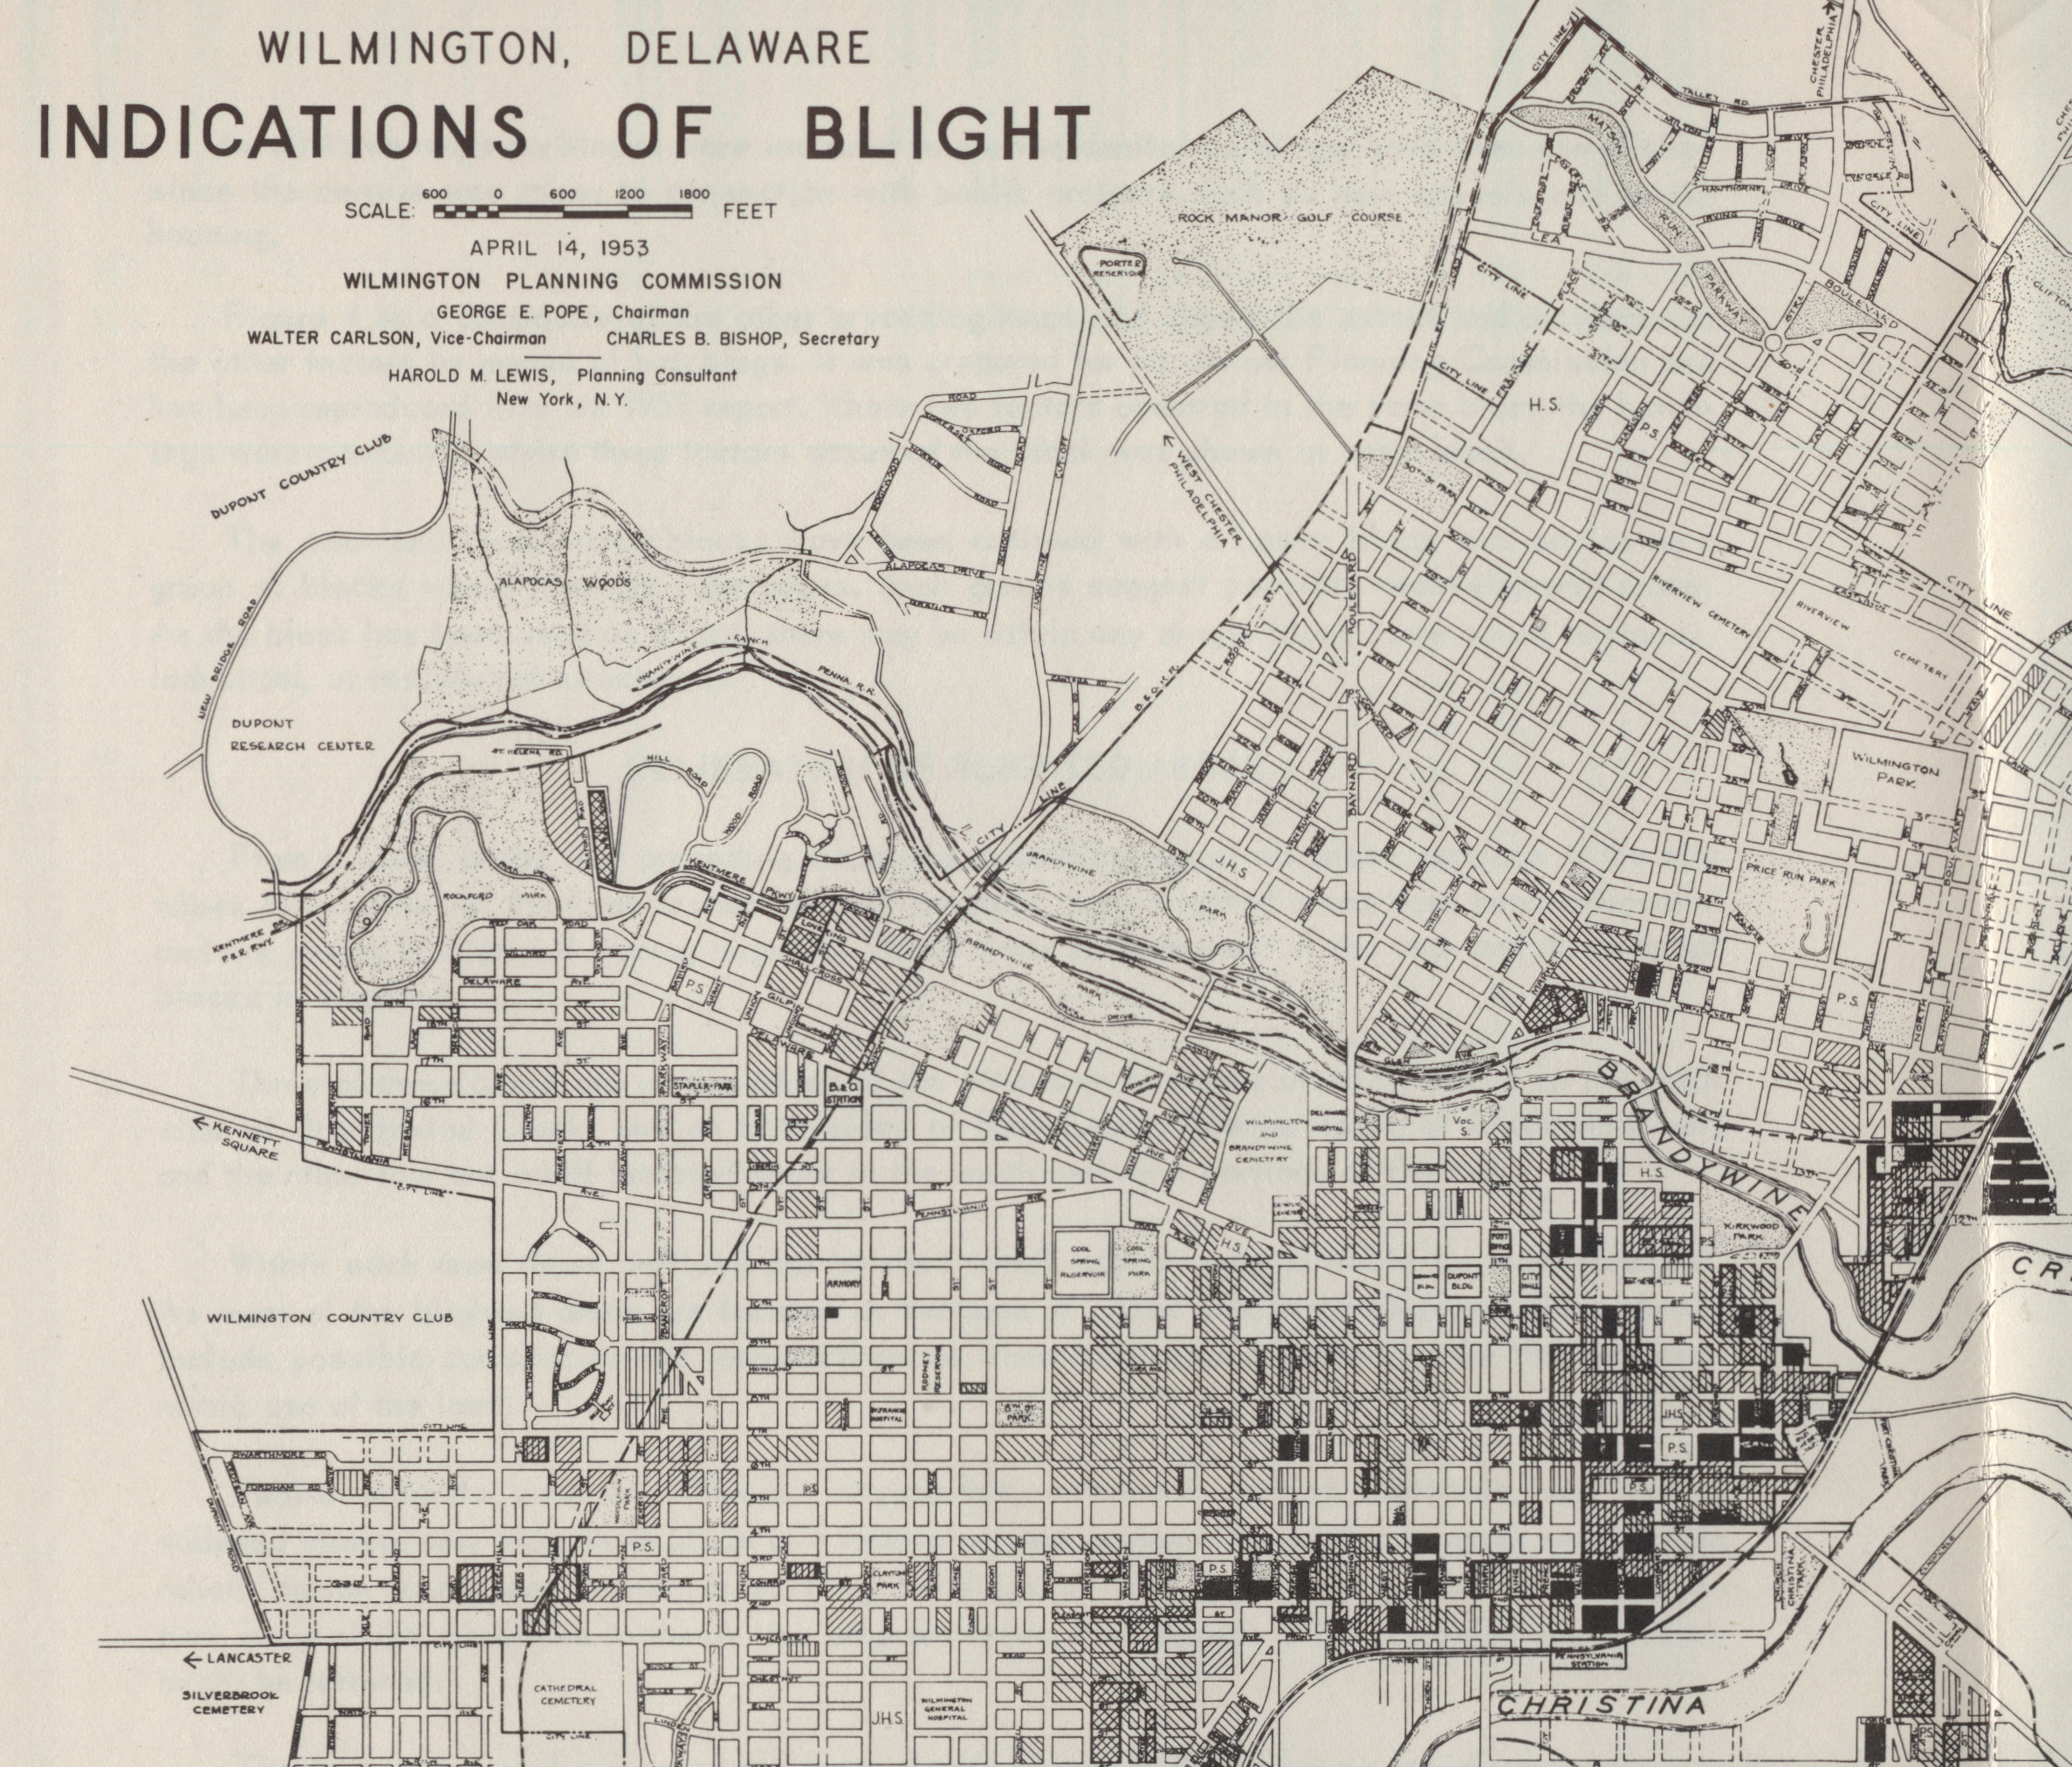 From
"A Report on Blighted Areas in the City of Wilmington," Wilmington Planning Commission, 1954. (Courtesy of the Hagley Museum & Library)